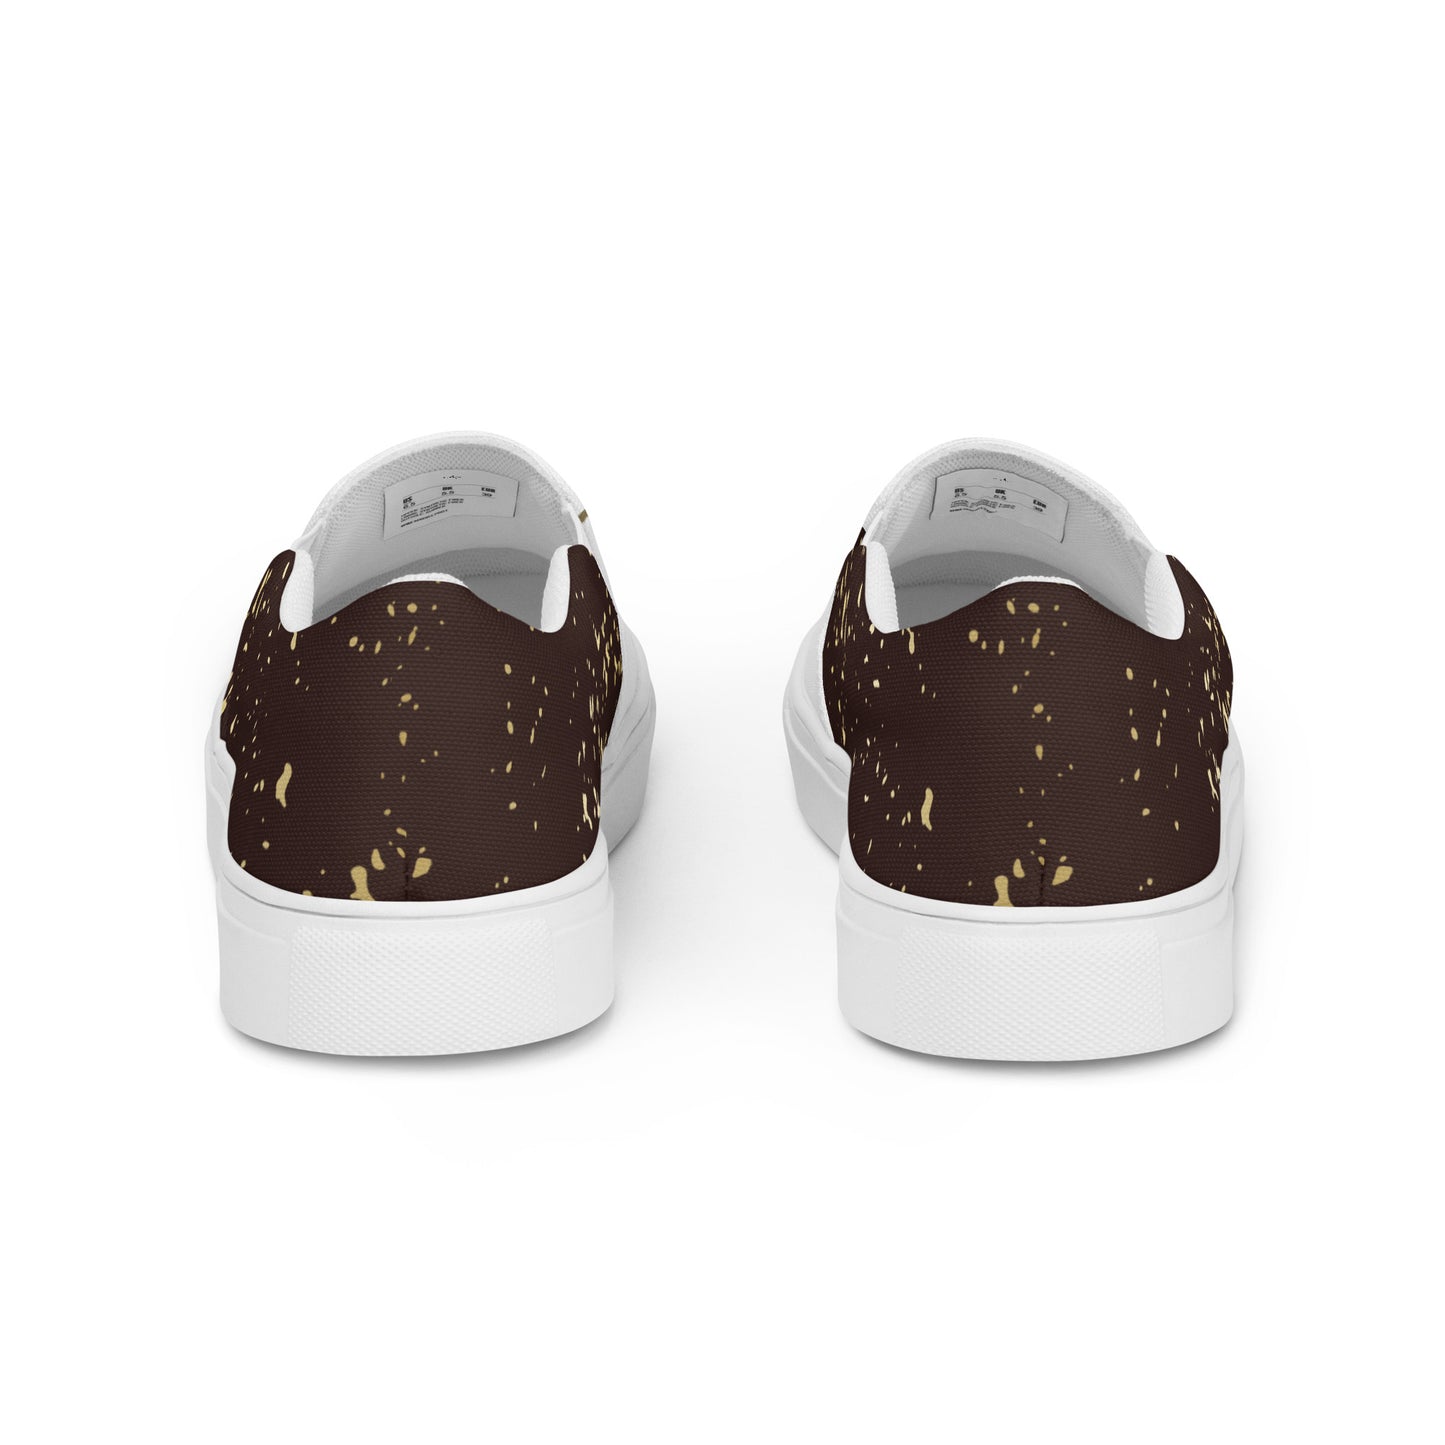 Agojie Chocolate Women’s slip-on canvas shoes